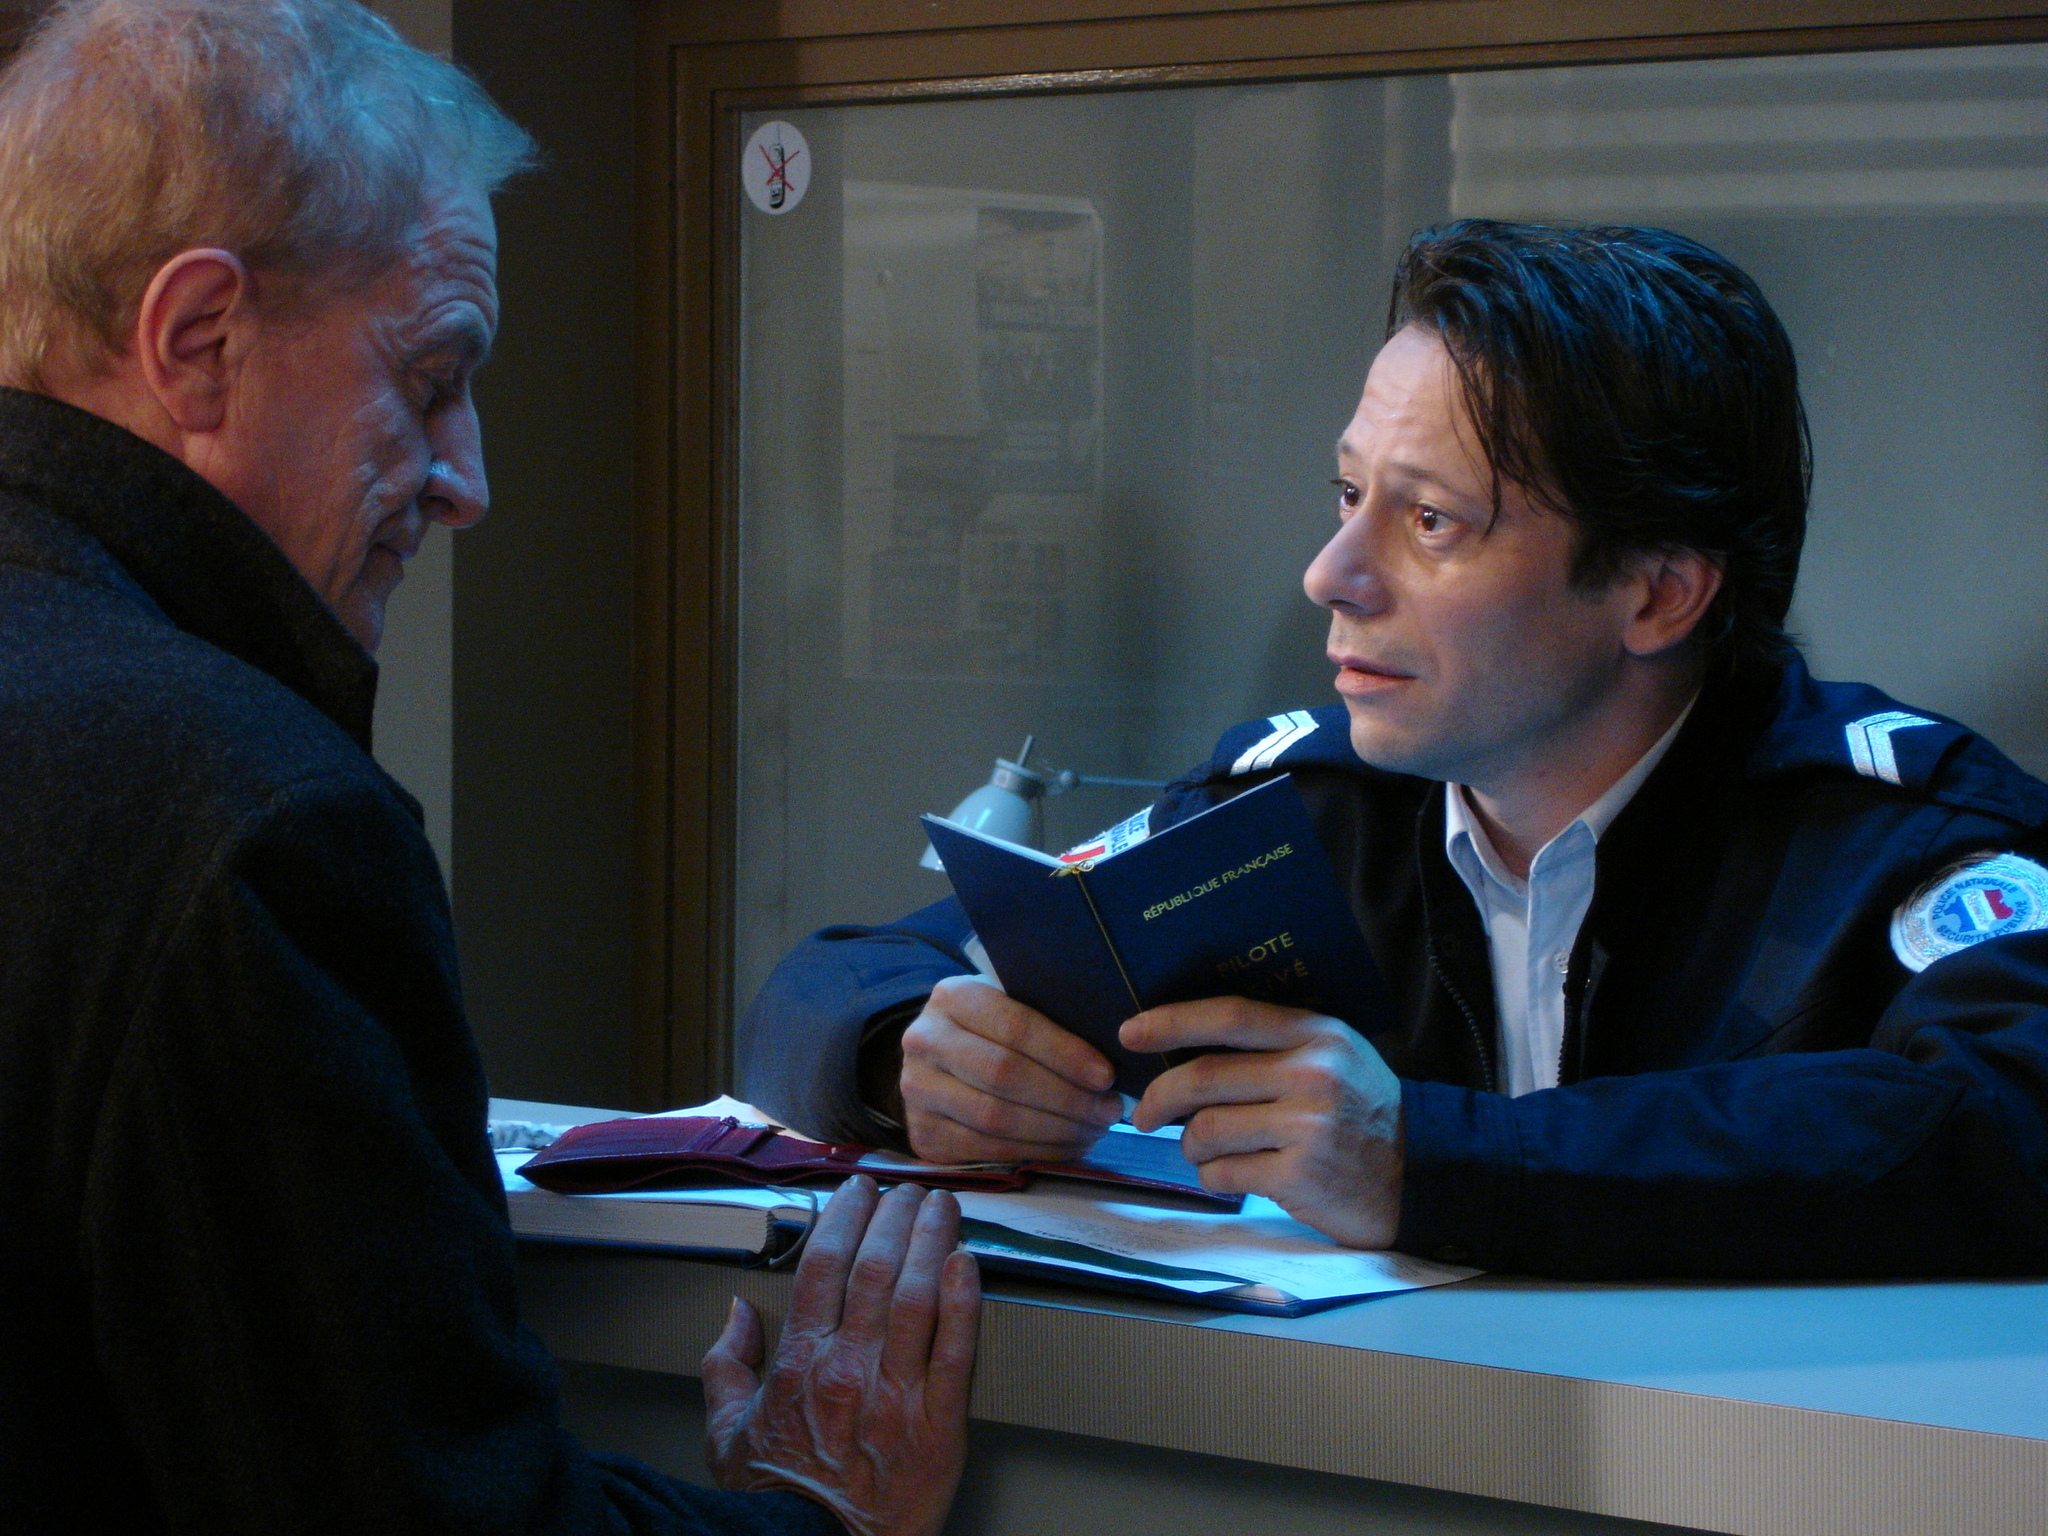 Still of Mathieu Amalric and André Dussollier in Les herbes folles (2009)